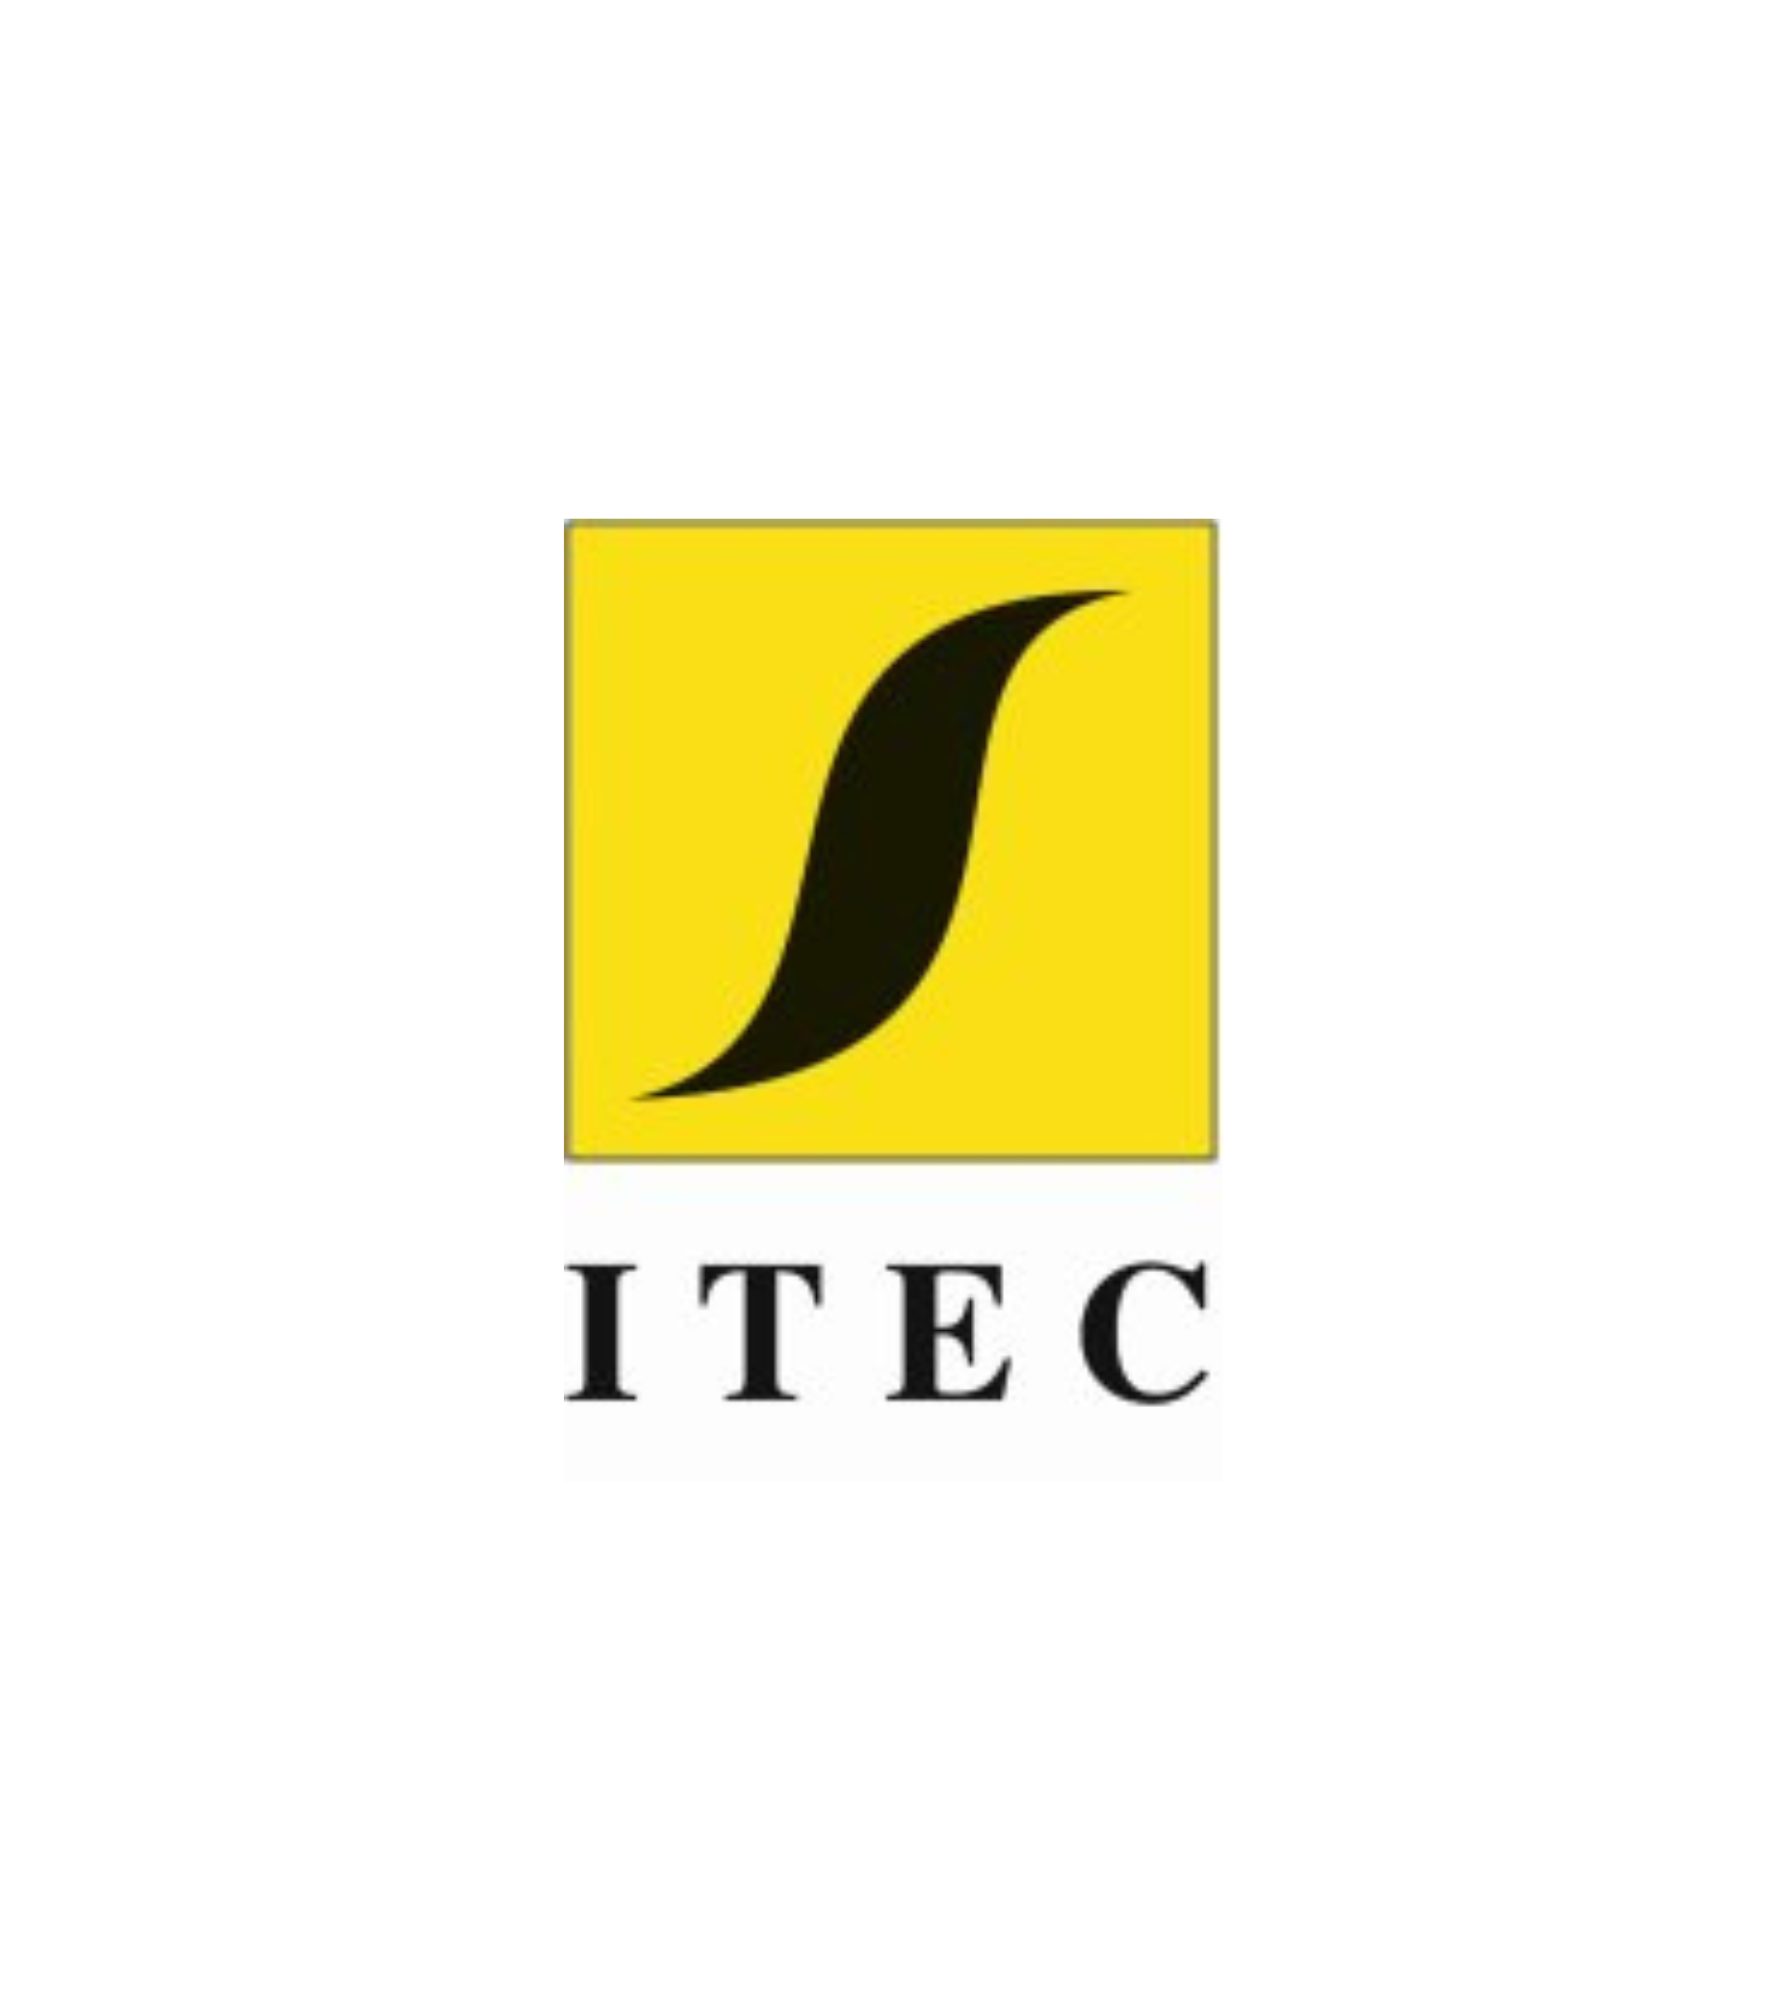 ITEC | Stand G25